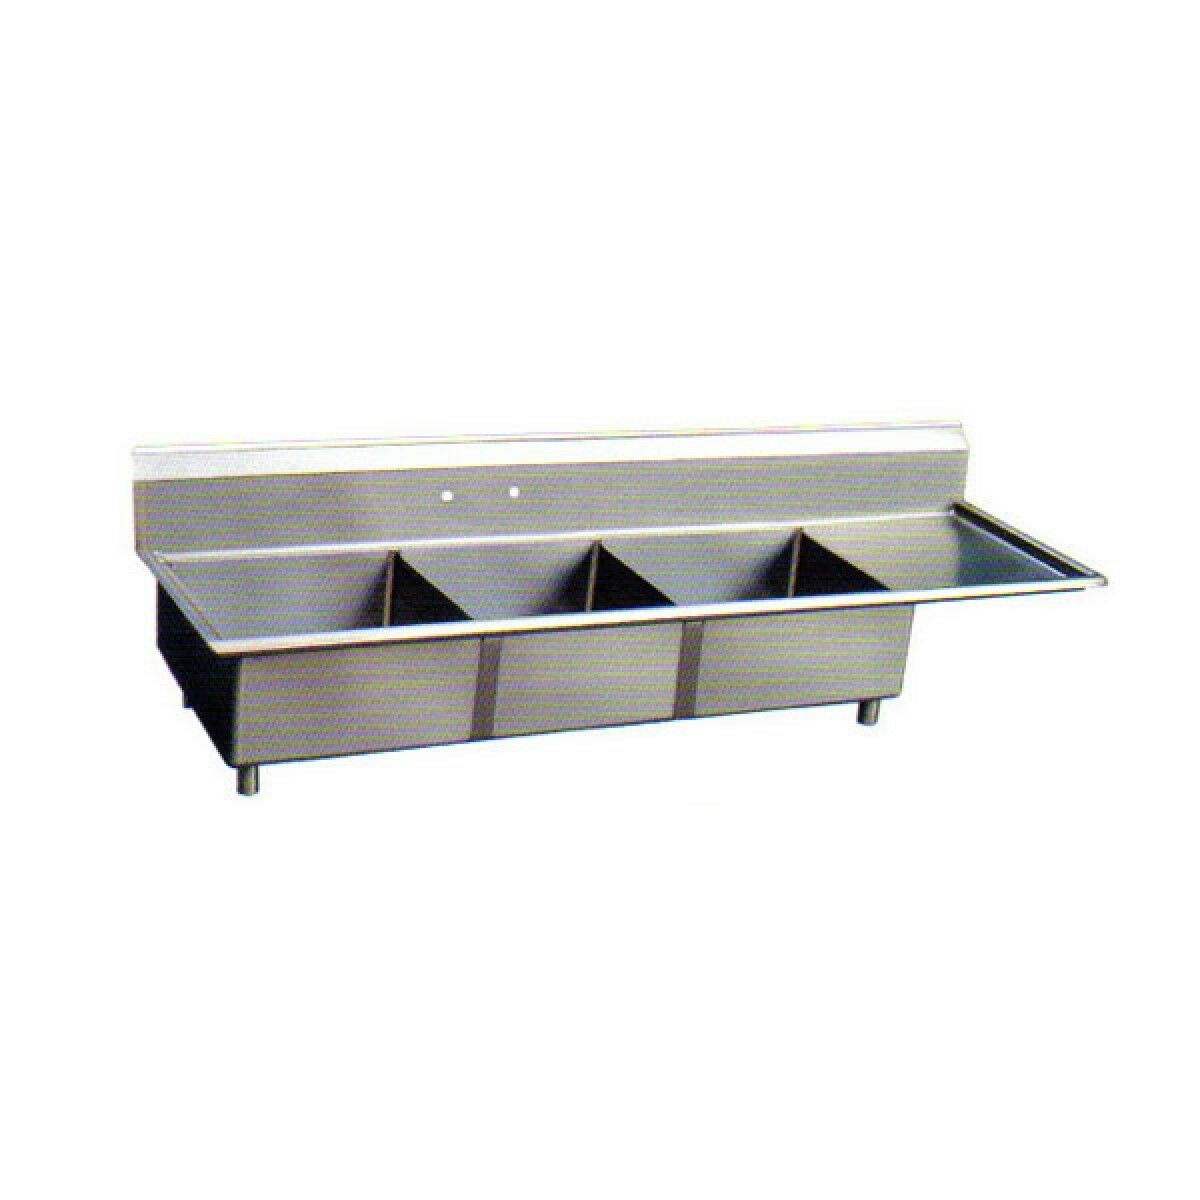 Sapphire Sms-3-1818r, 18x18-inch 3-compartment Stainless Steel Sink With Right D